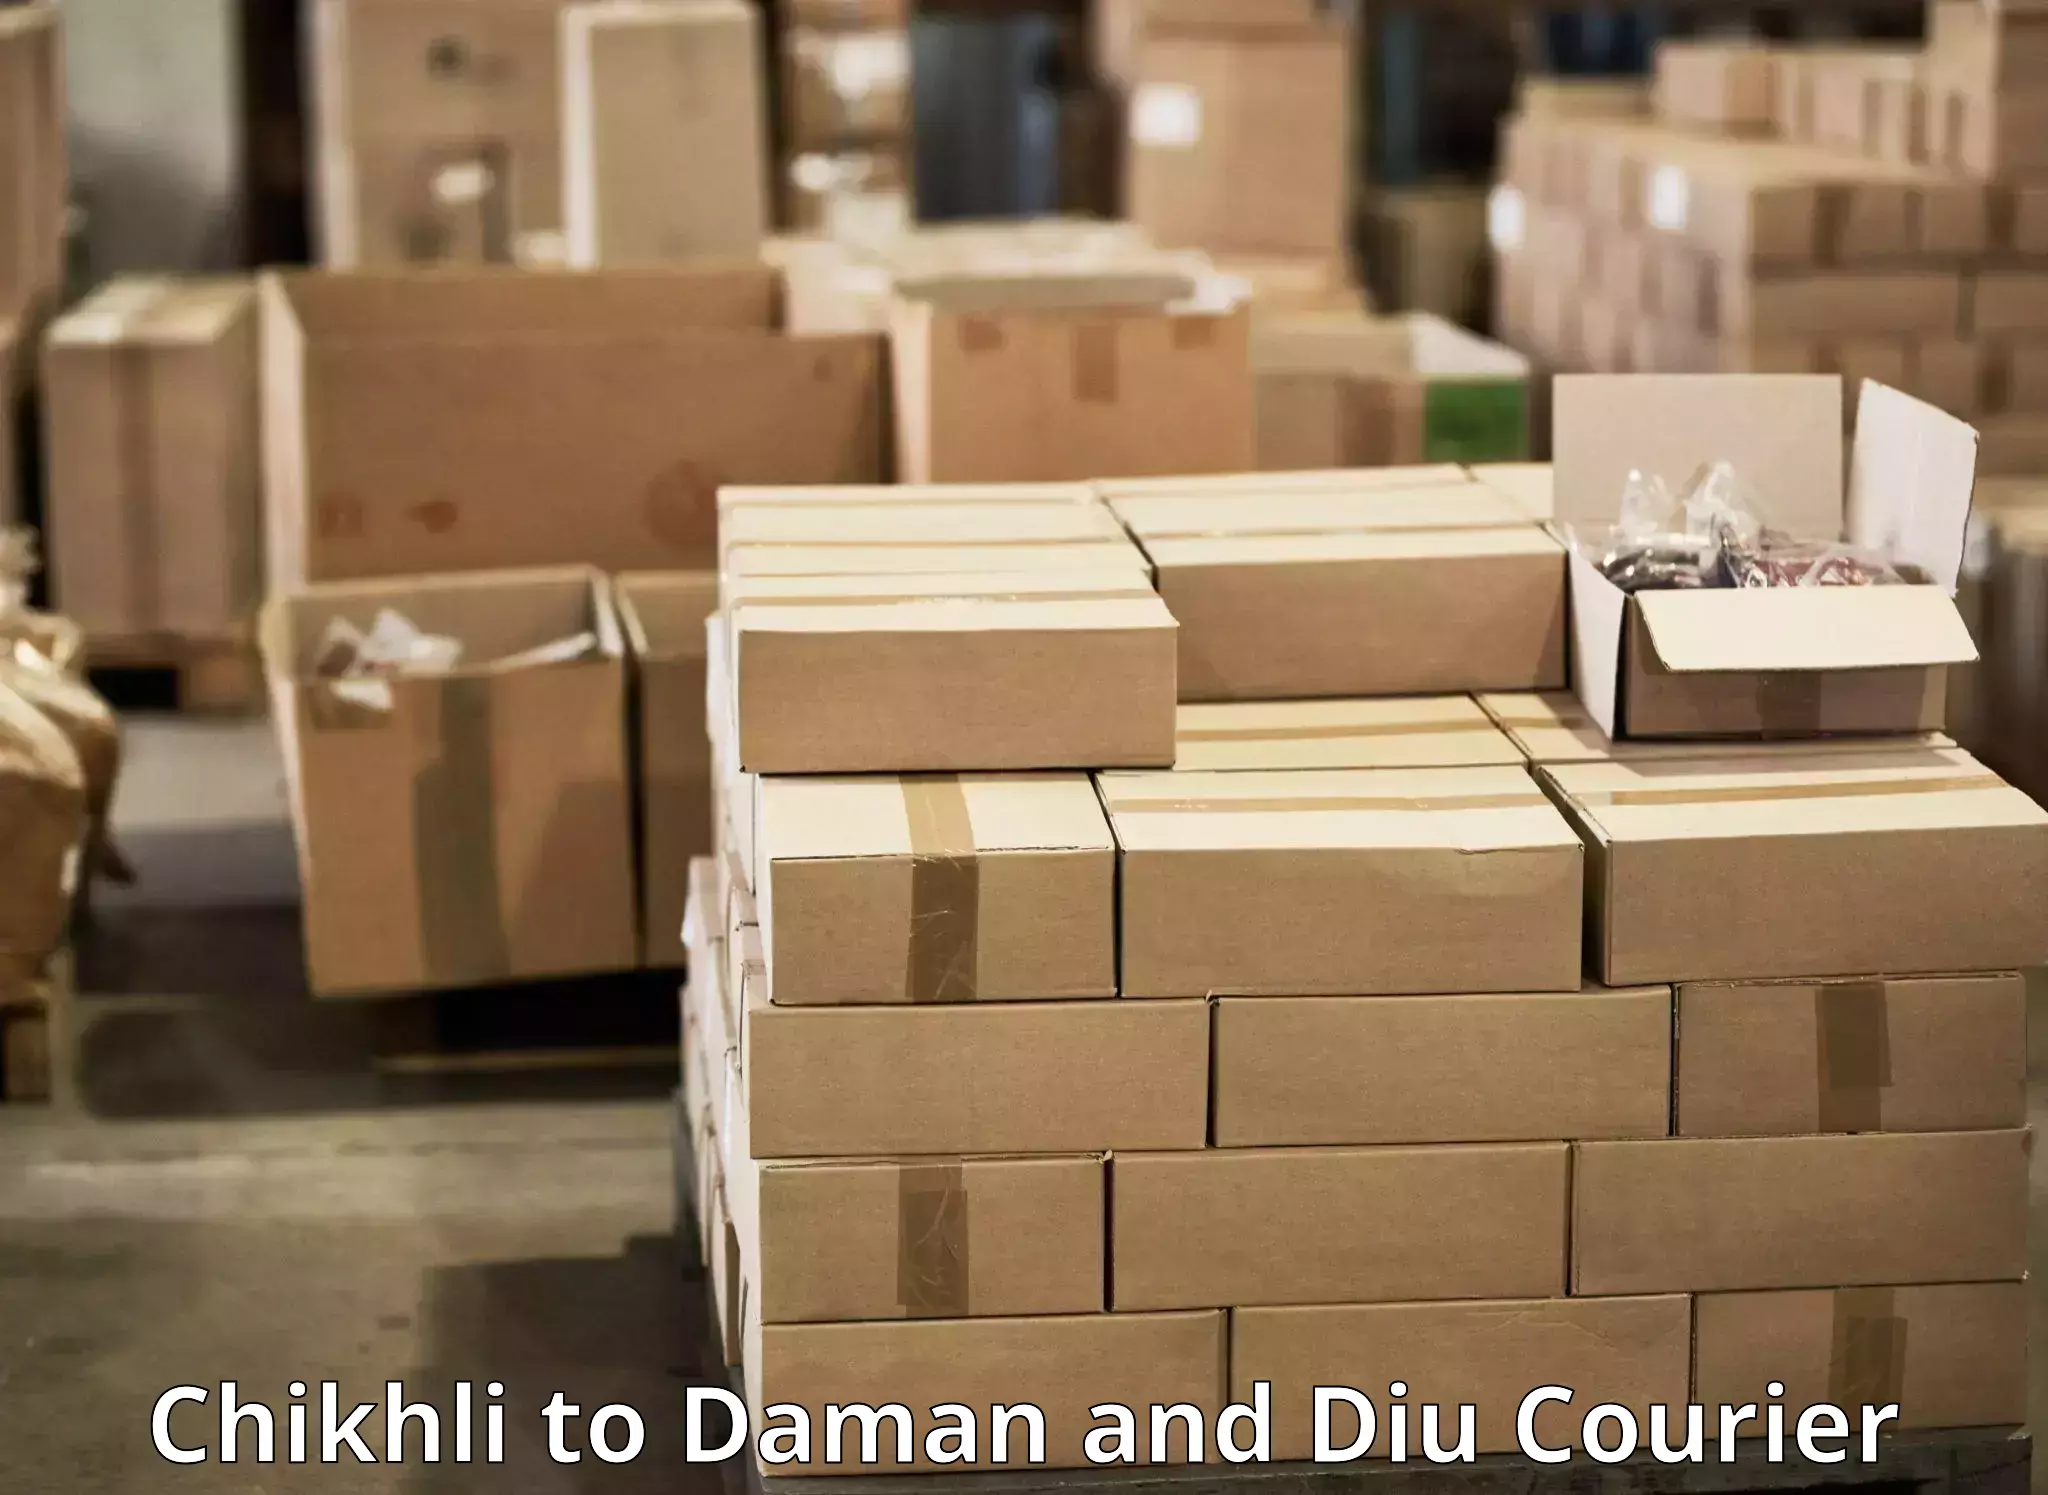 Nationwide shipping coverage Chikhli to Daman and Diu